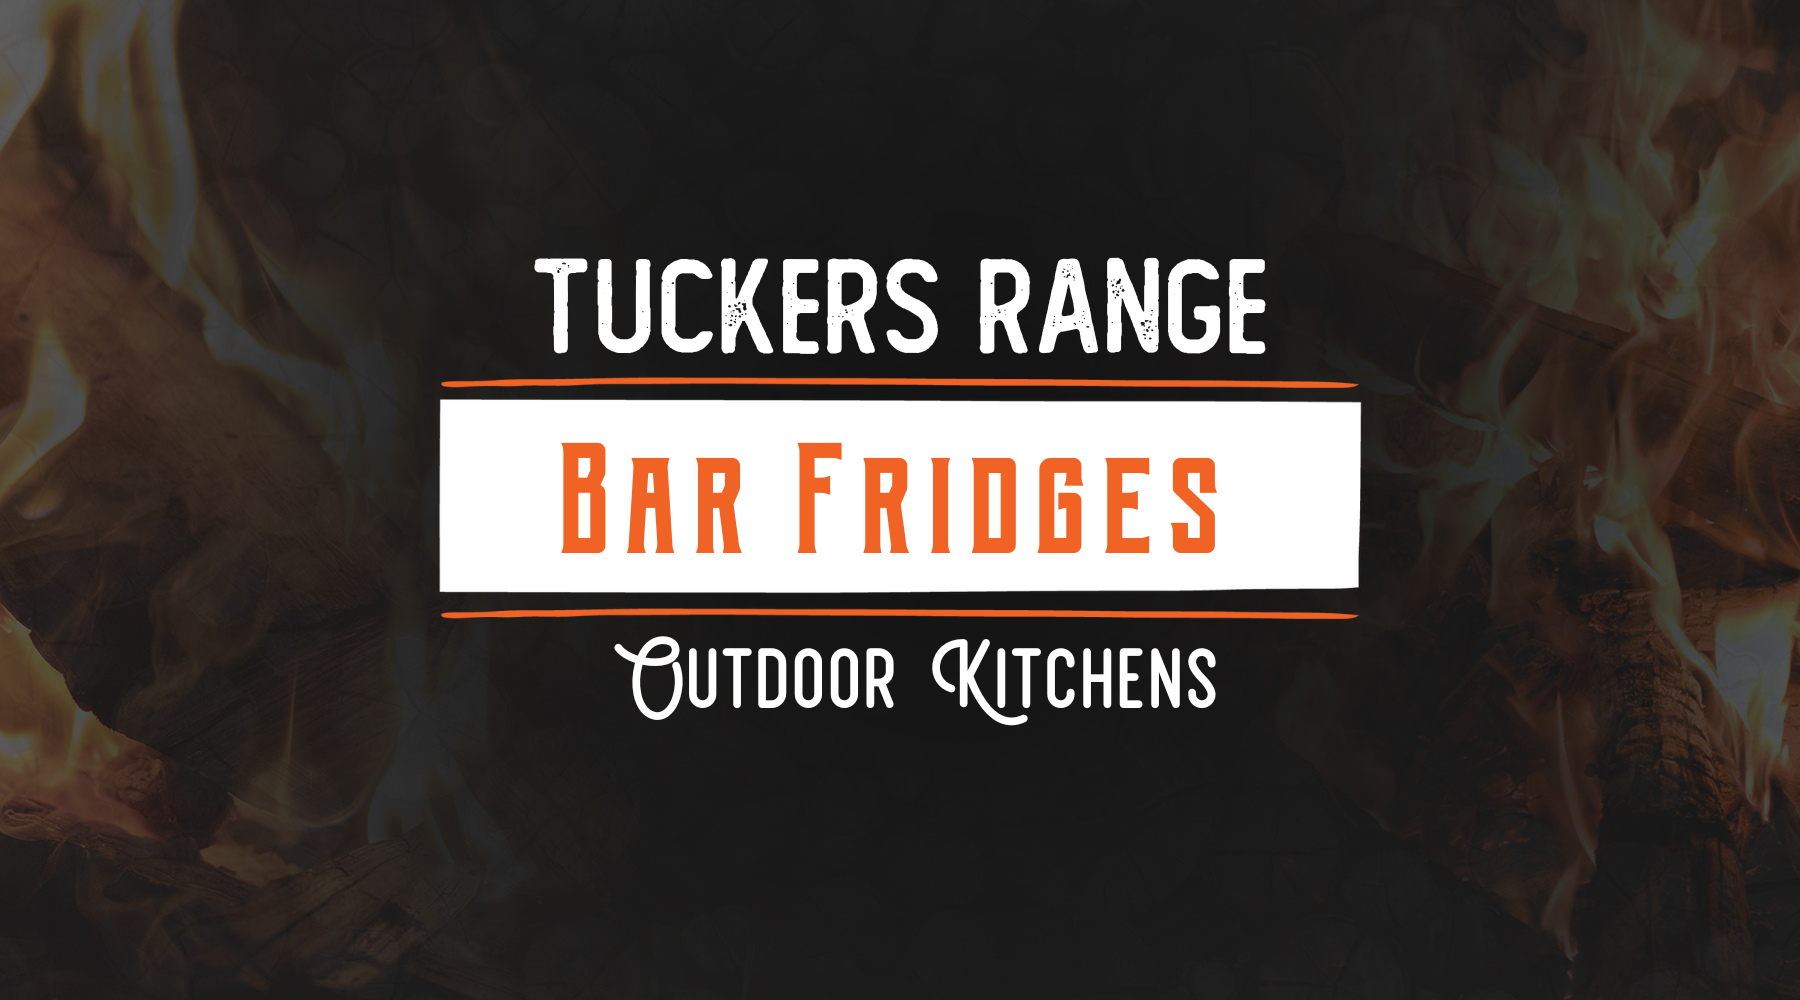 The Benefits of Having a Bar Fridge in Your Outdoor Kitchen with Tucker Barbecues